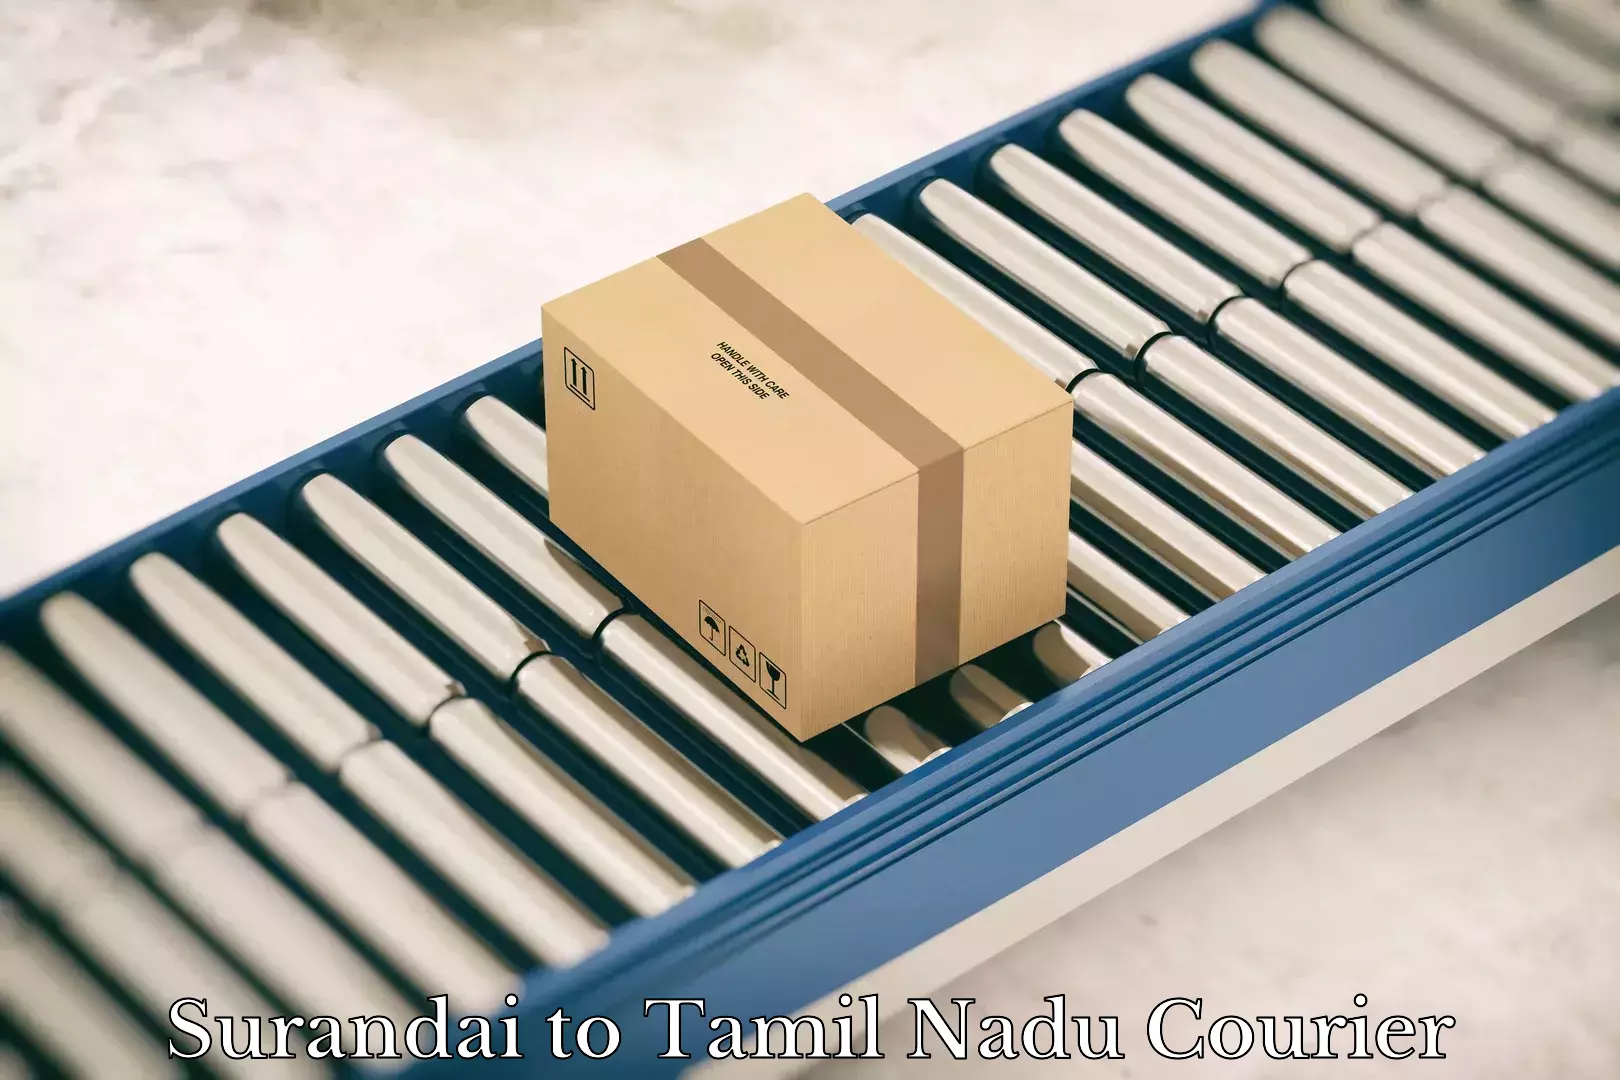 Efficient courier operations Surandai to Tamil Nadu